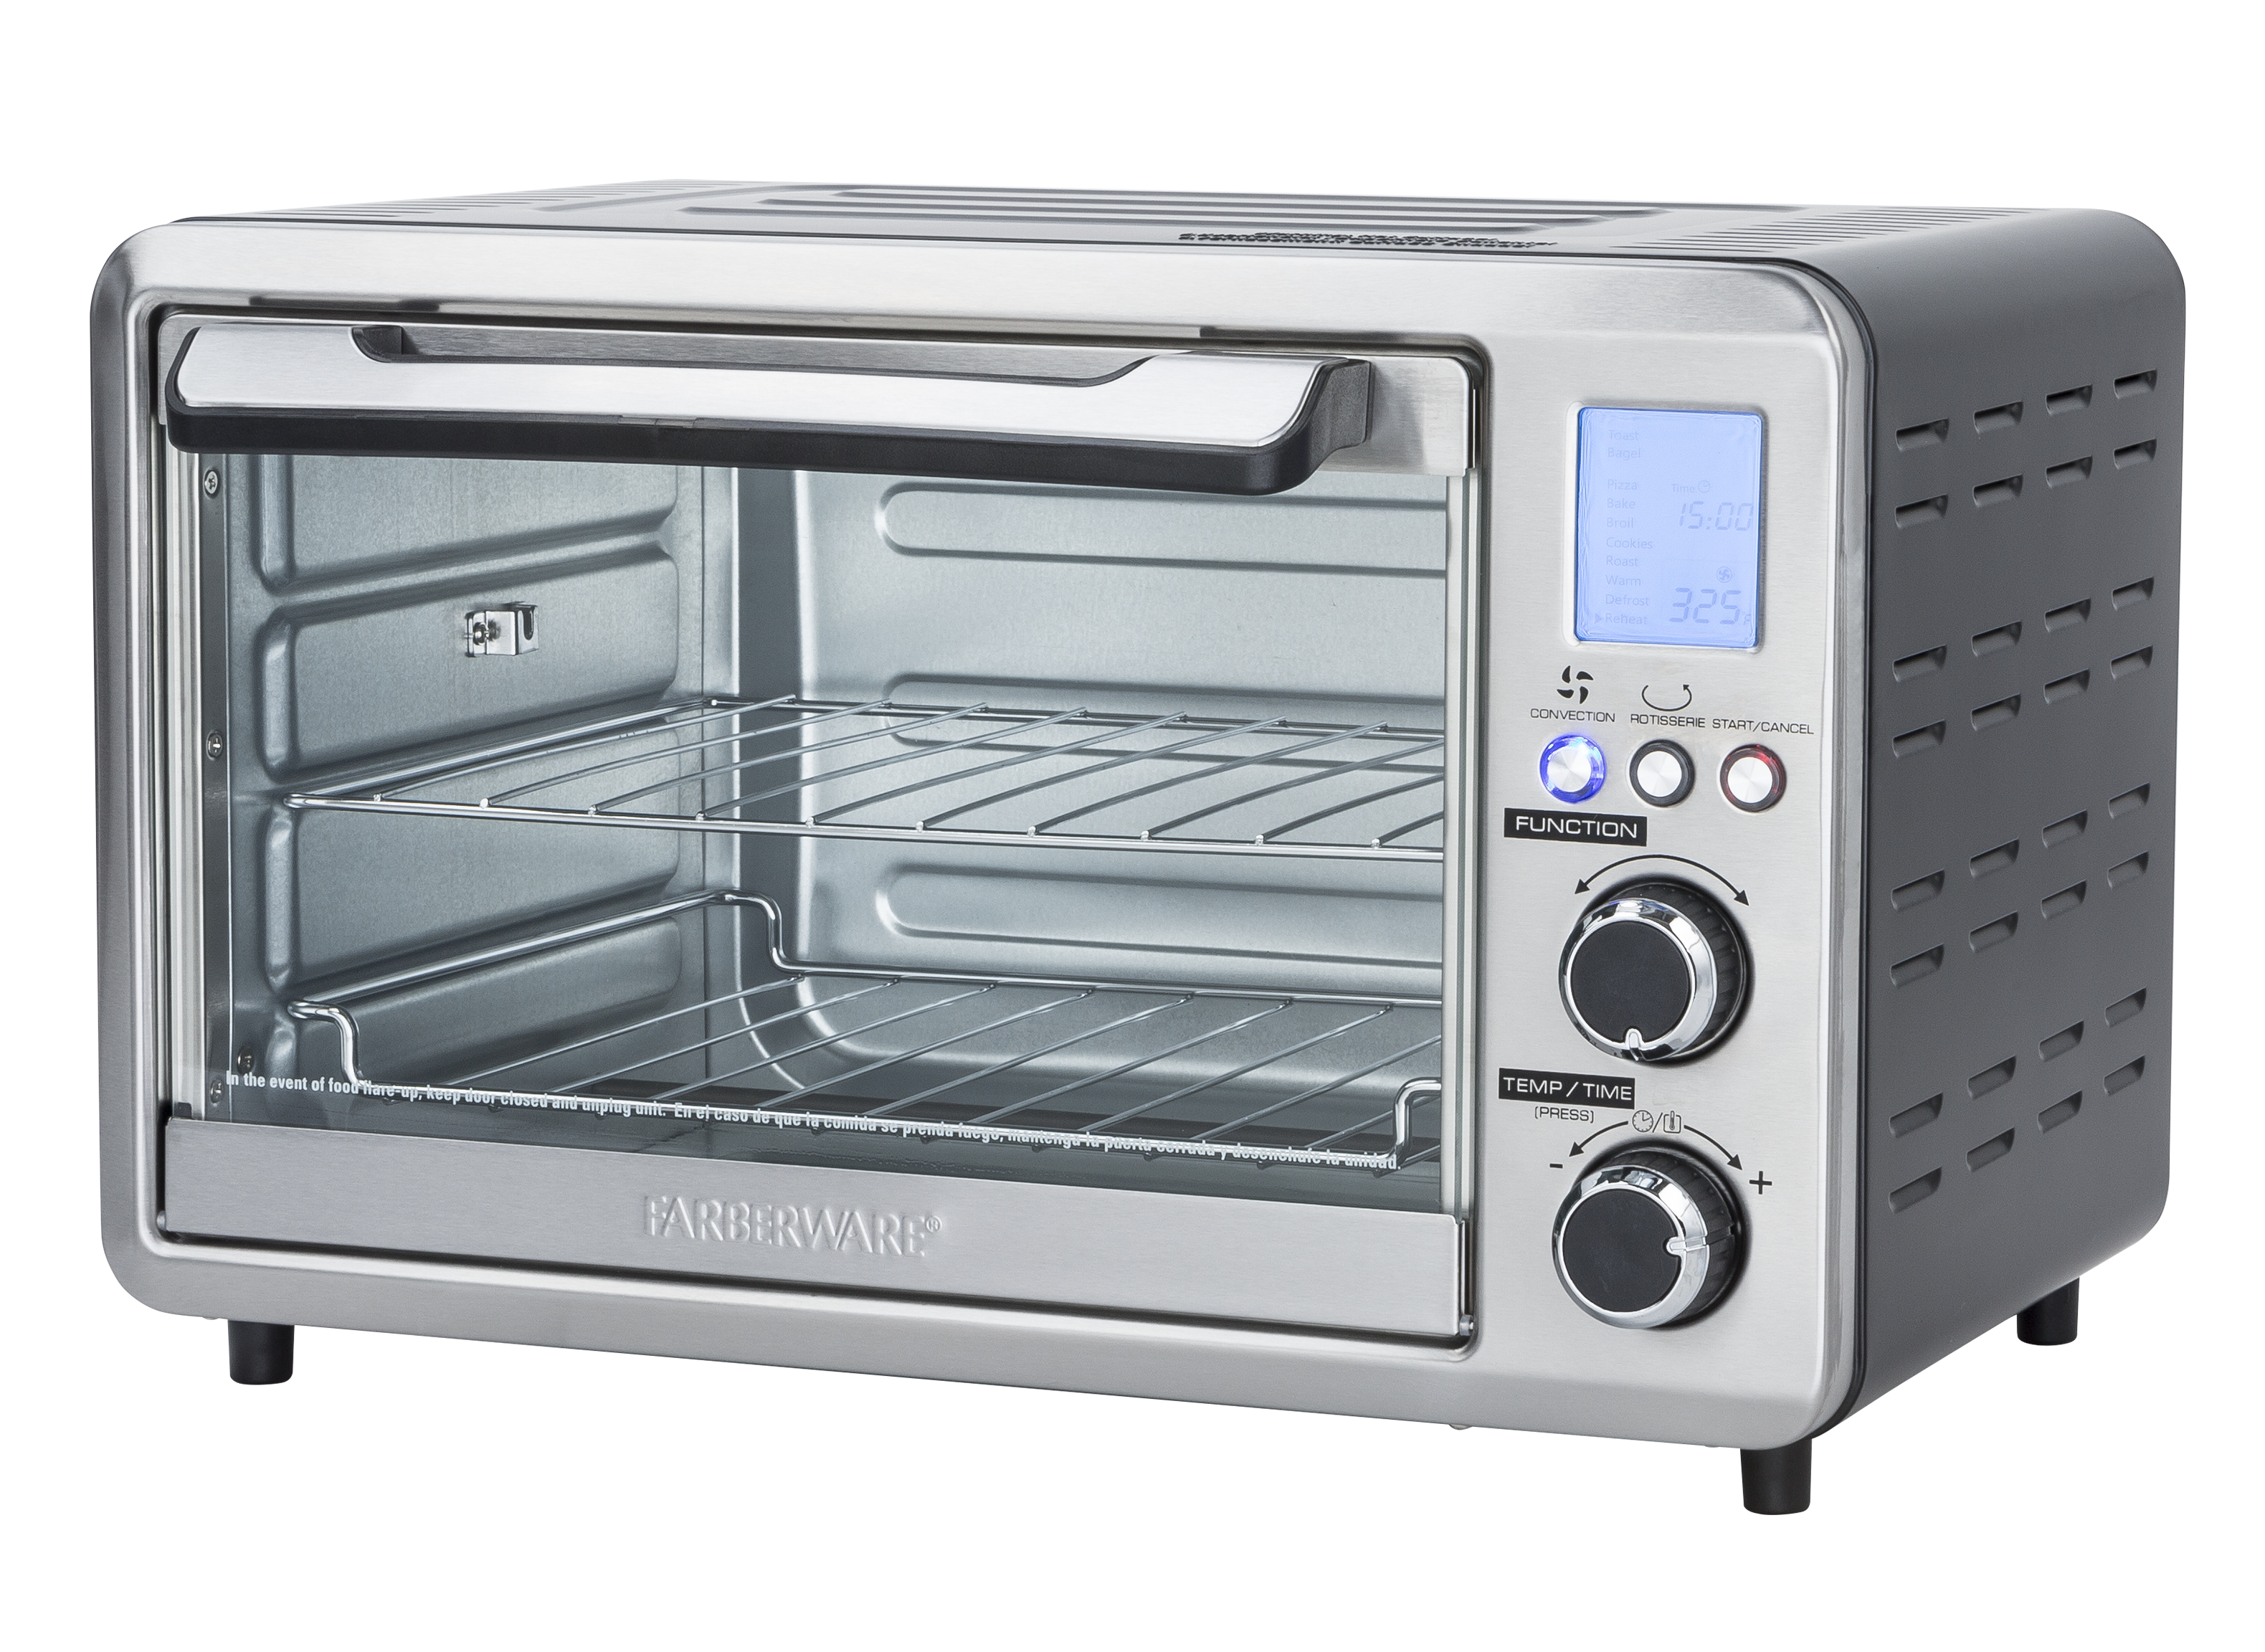 Bene Casa 25L Toaster Oven with Double Burner, 25 Liter